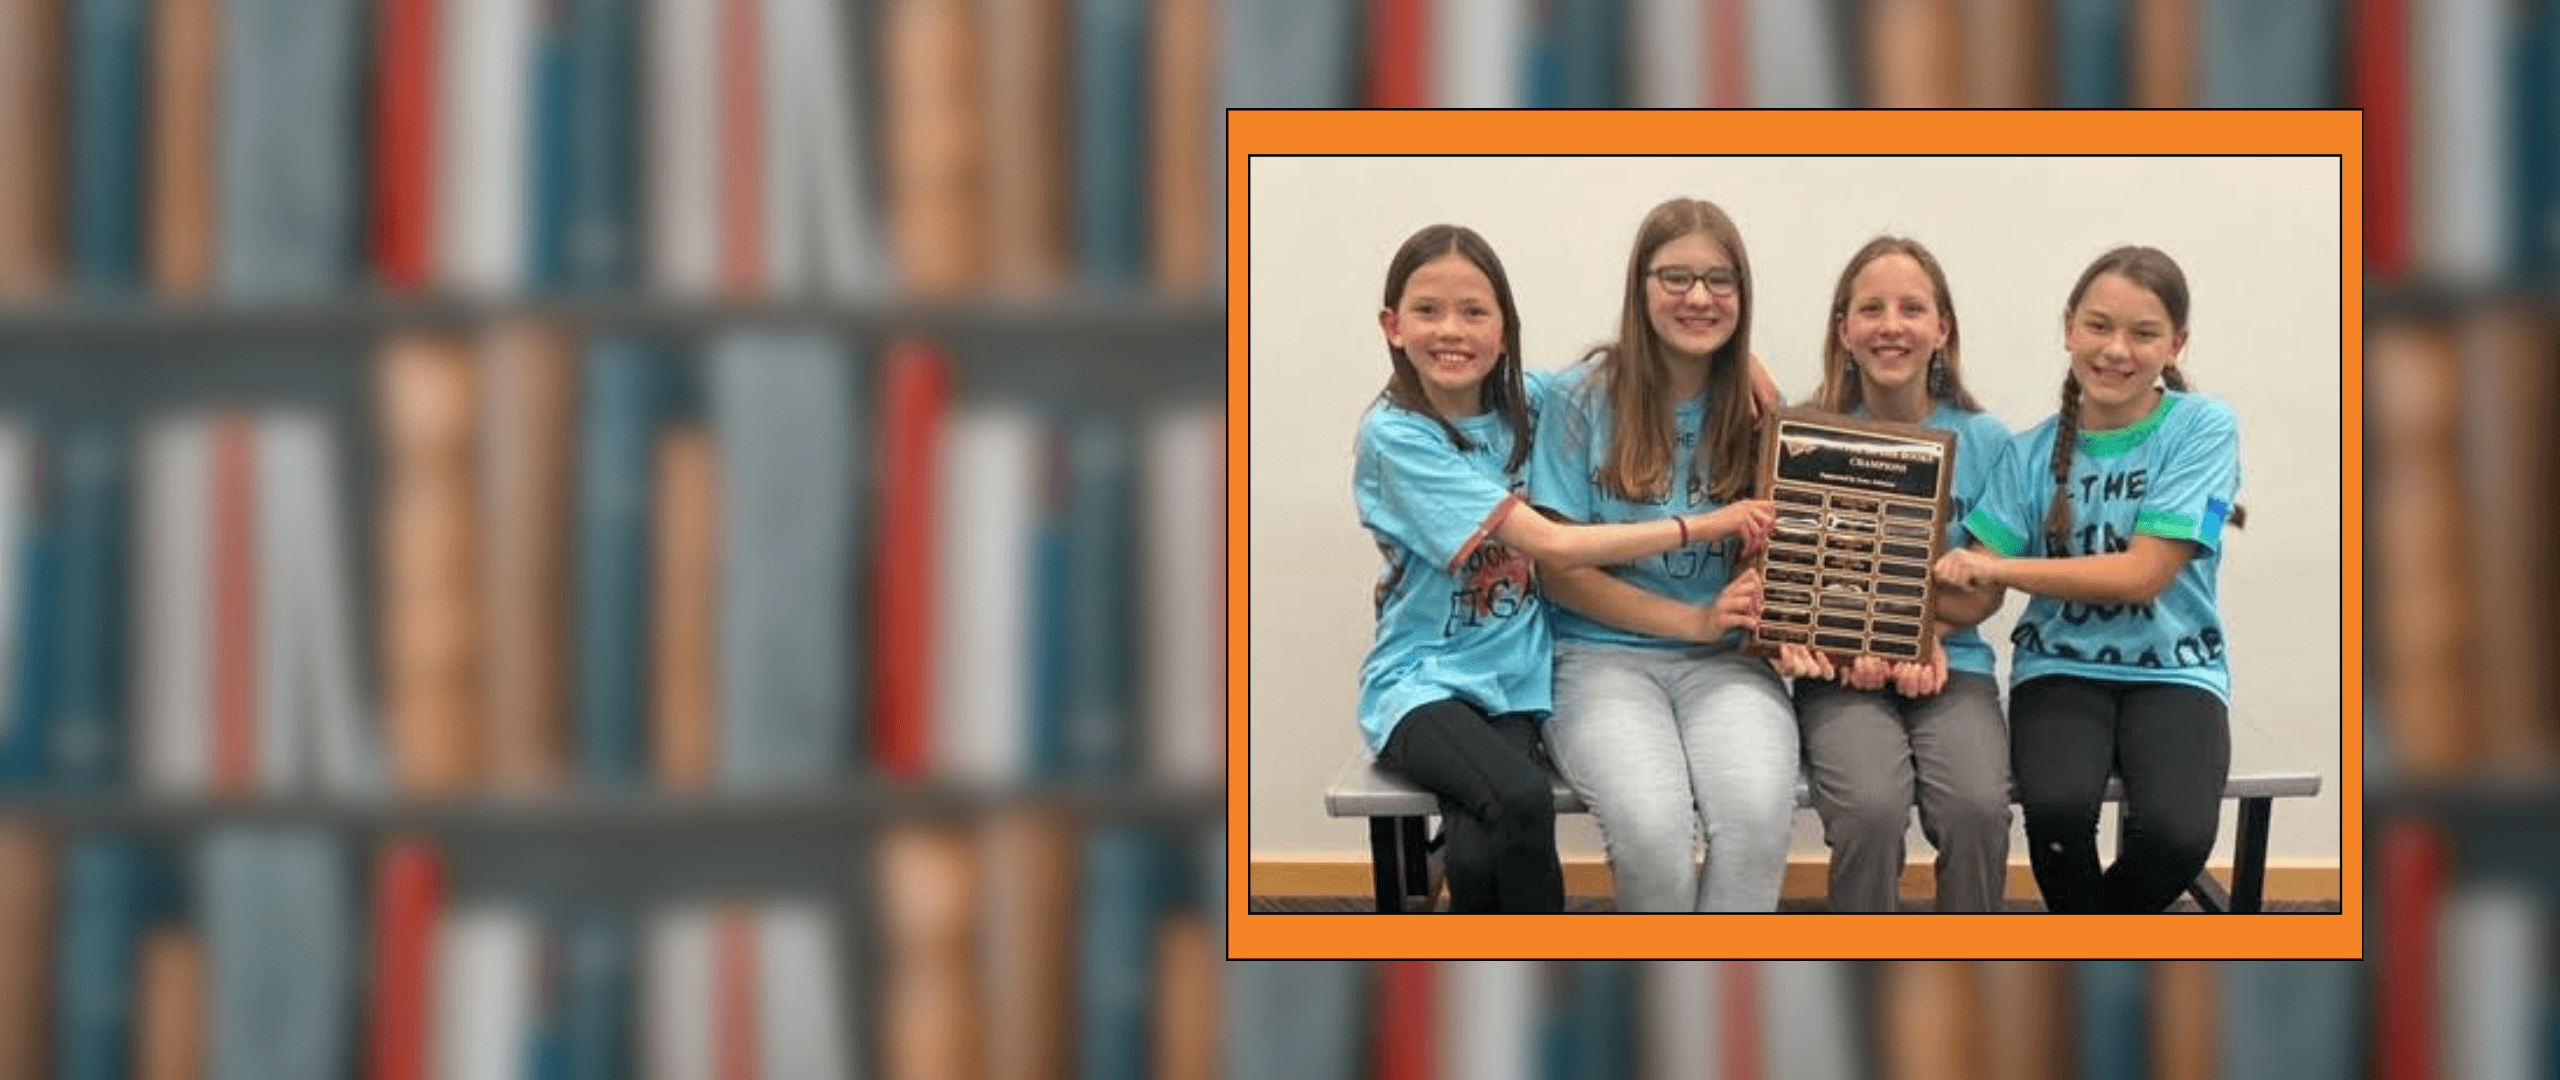 Meeker Ties For First In Battle of the Books